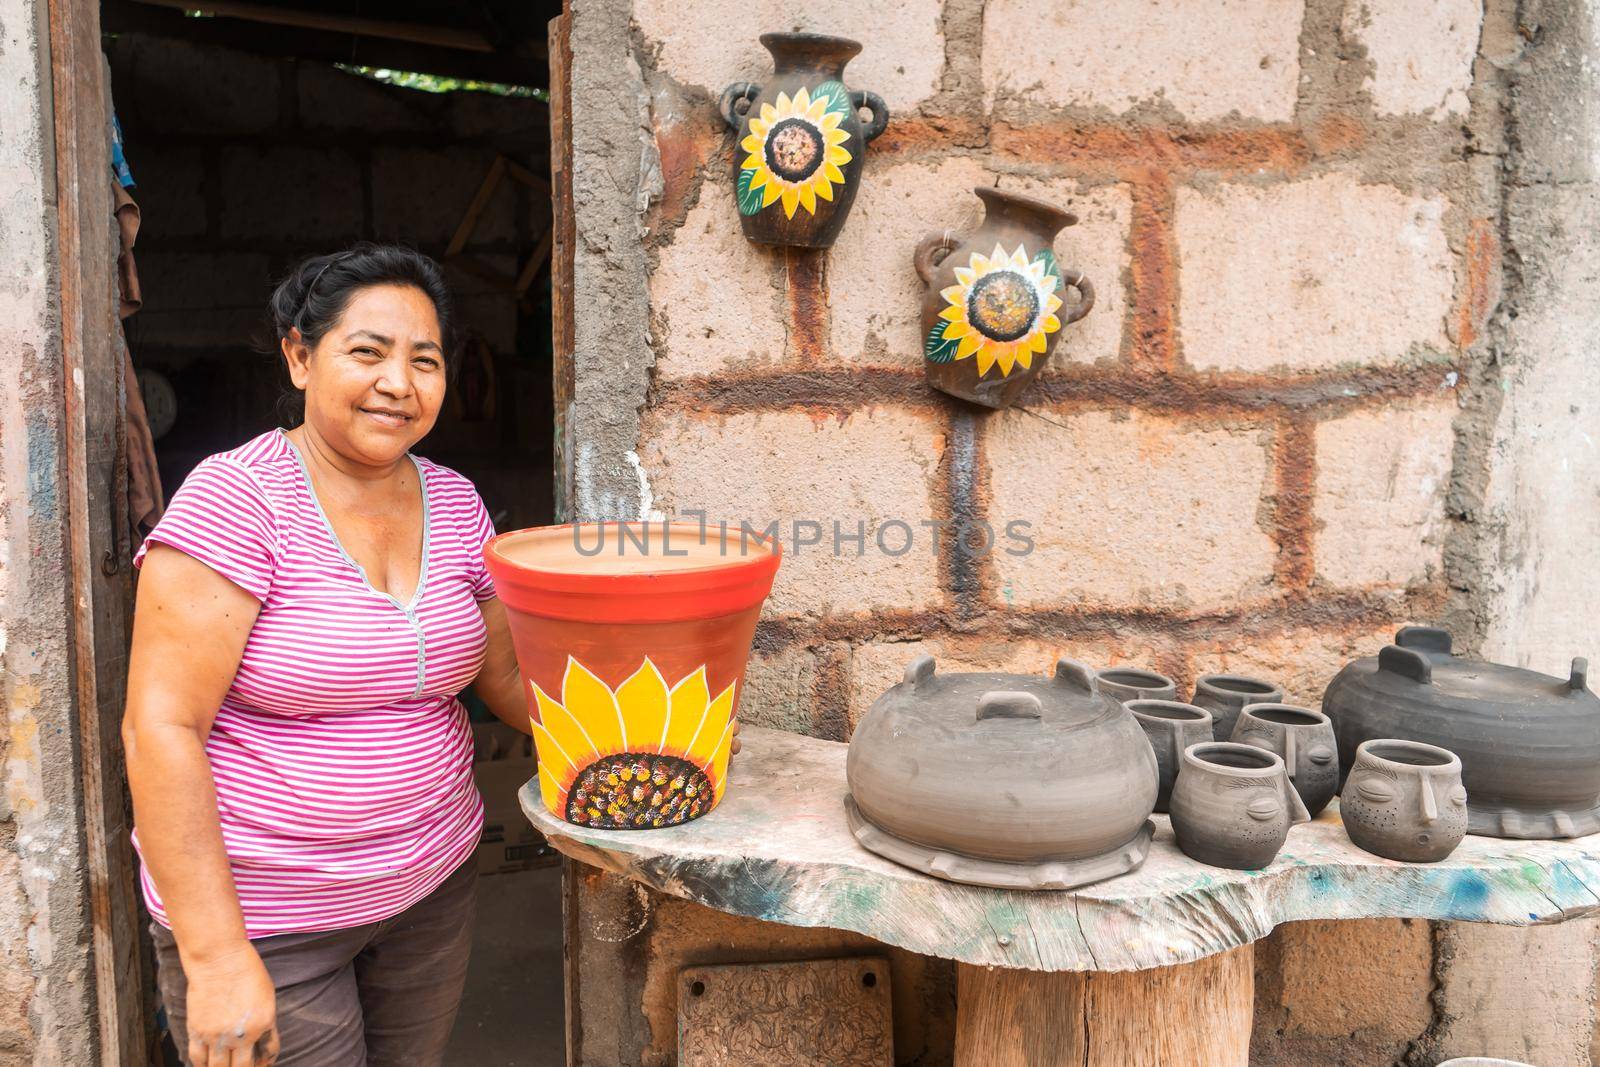 Artisan woman from La Paz Centro Nicaragua posing next to her clay crafts and smiling by cfalvarez